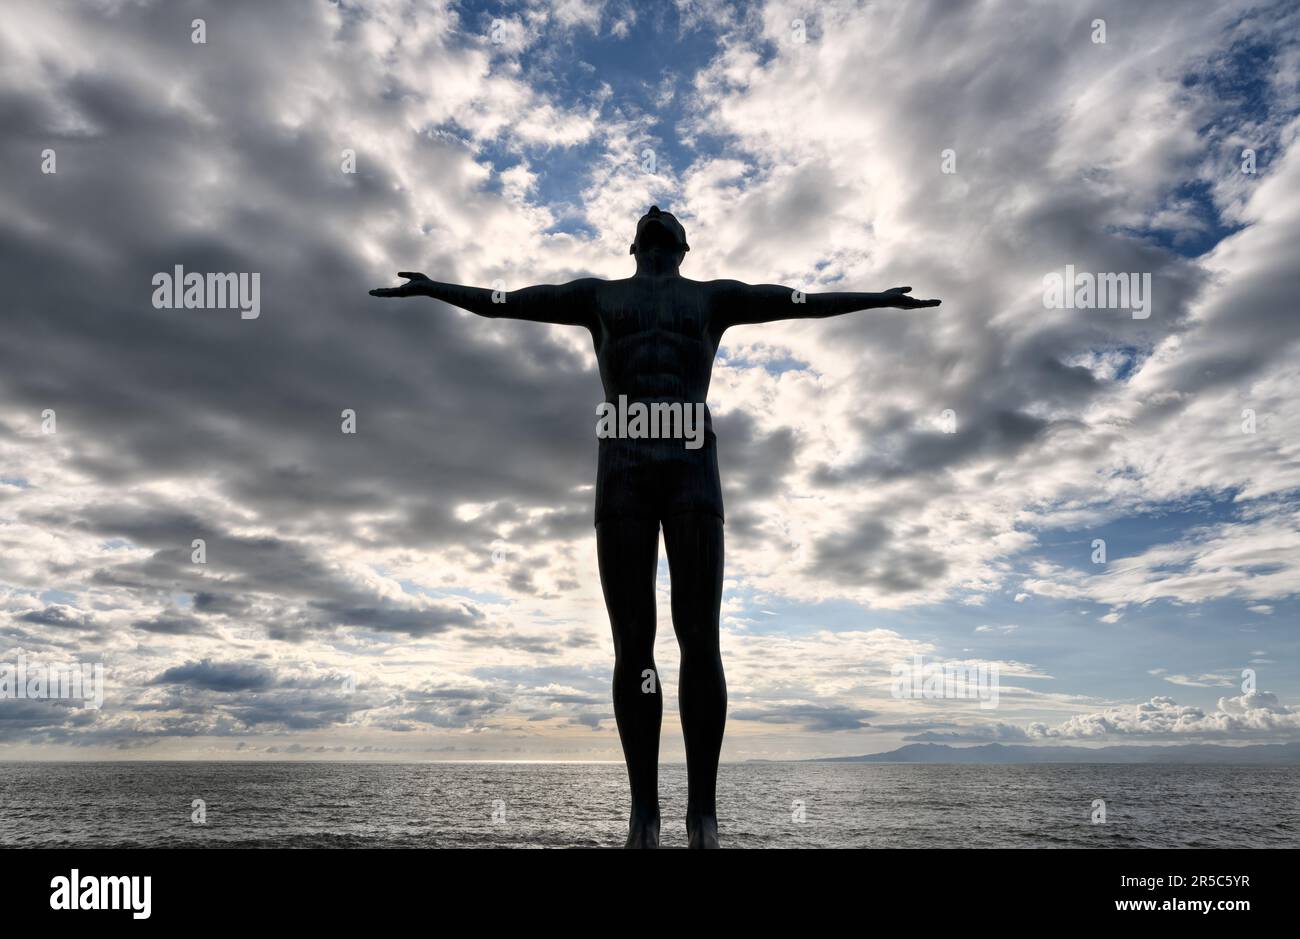 A Silhouette Of A Man With Outstretched Arms Looking Up To The Sky Stock Photo